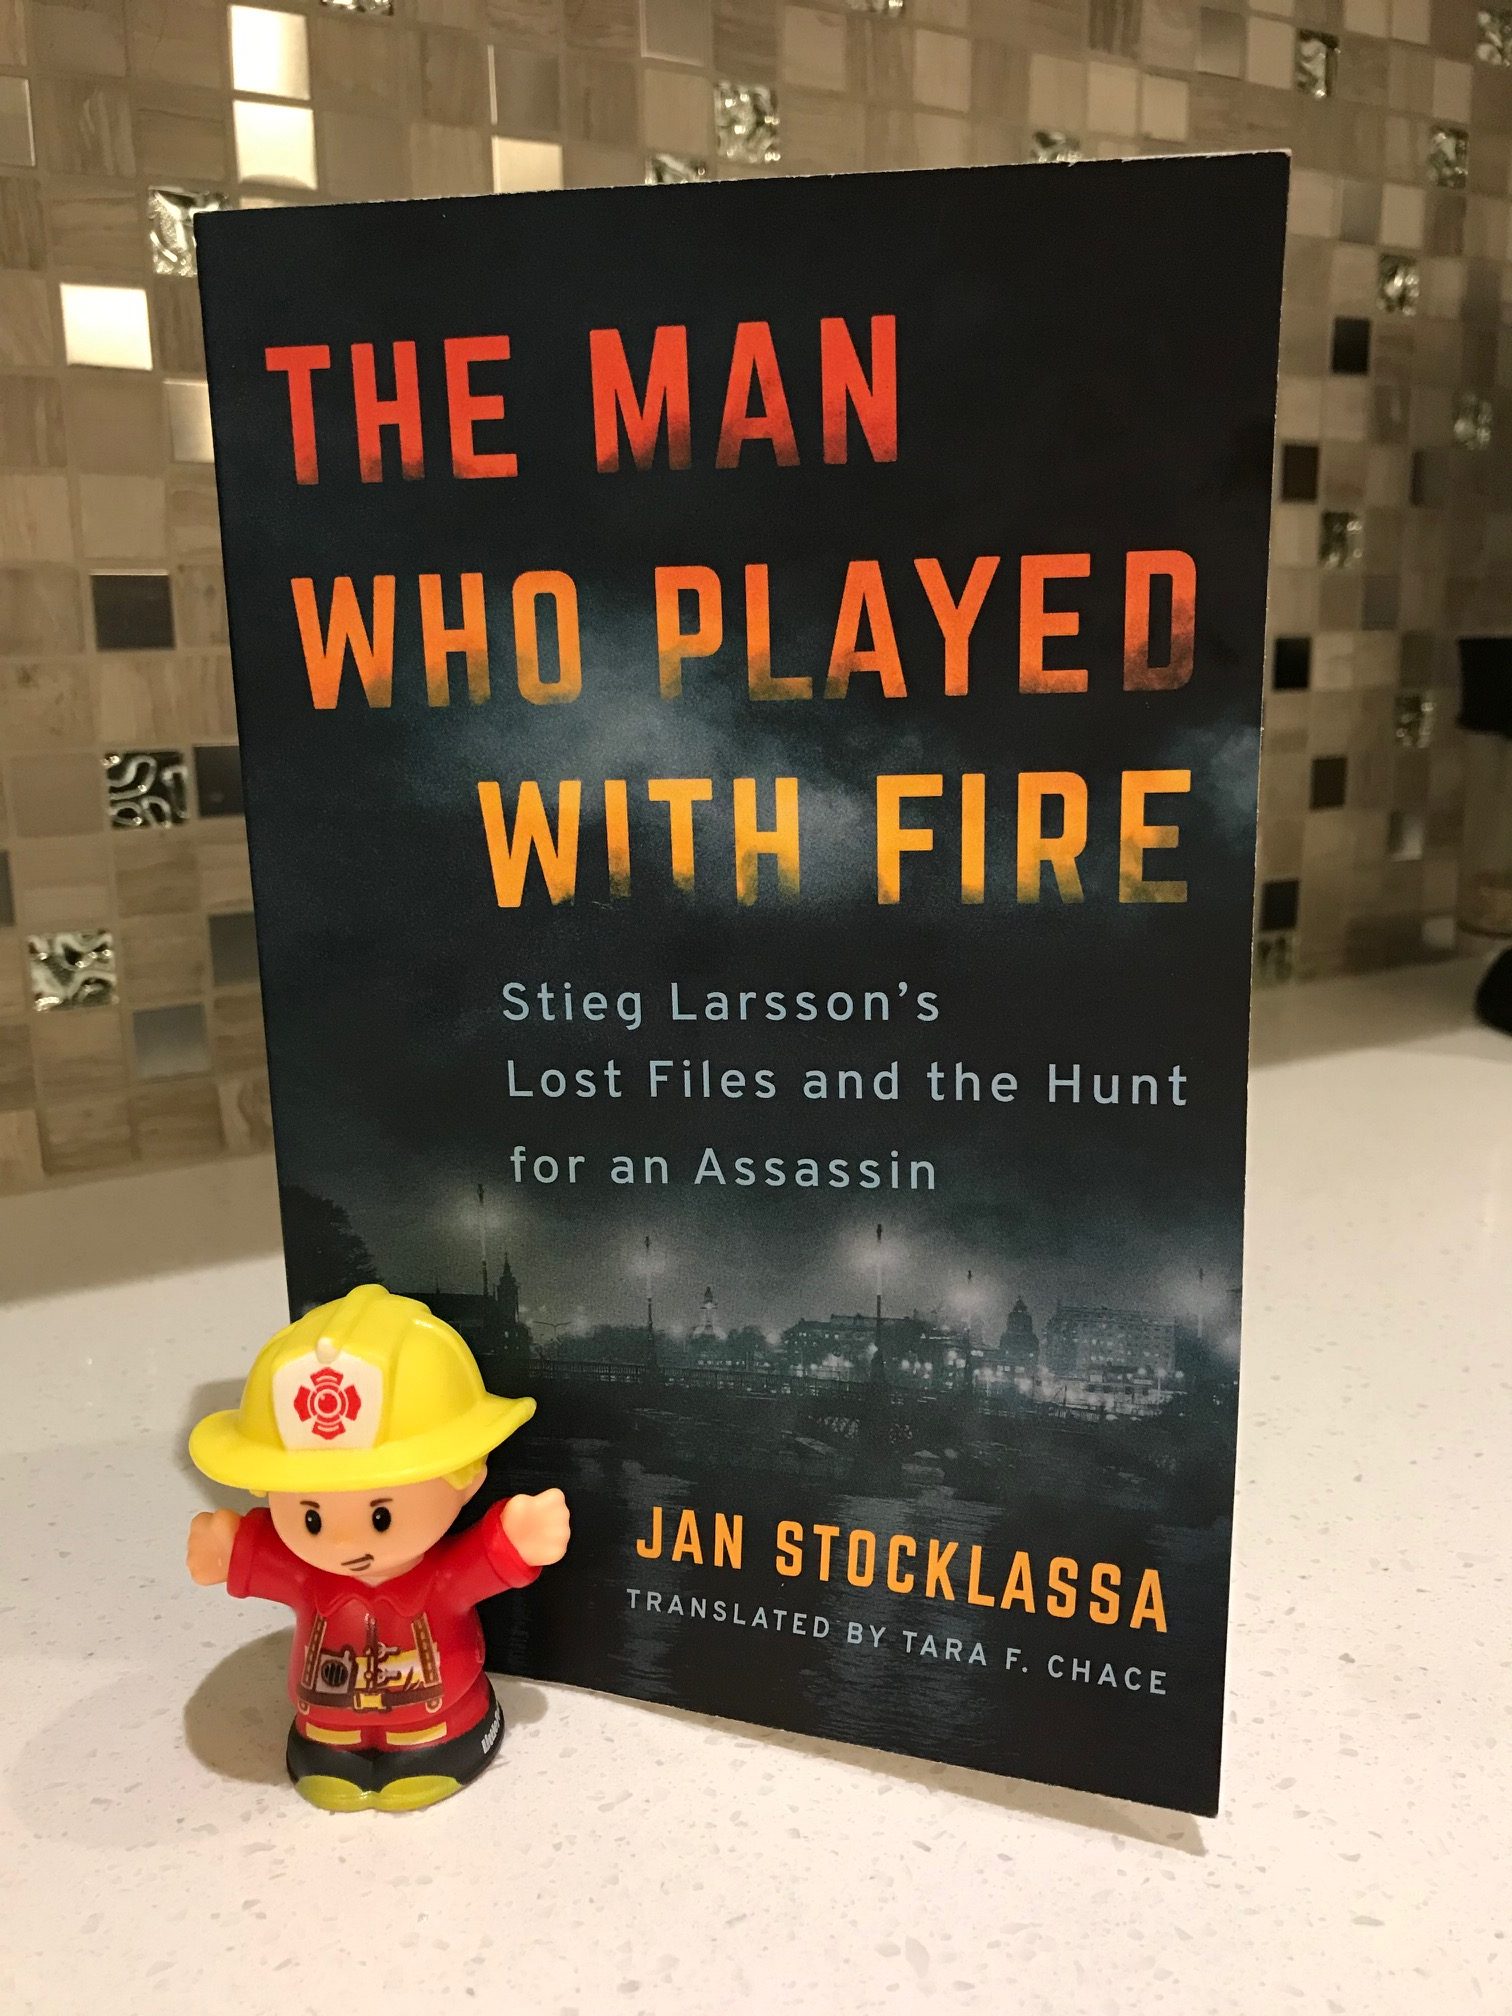 A True Crime Battle: The Man Who Played with Fire by Jan Stocklassa vs. Chase Darkness With Me by Billy Jensen